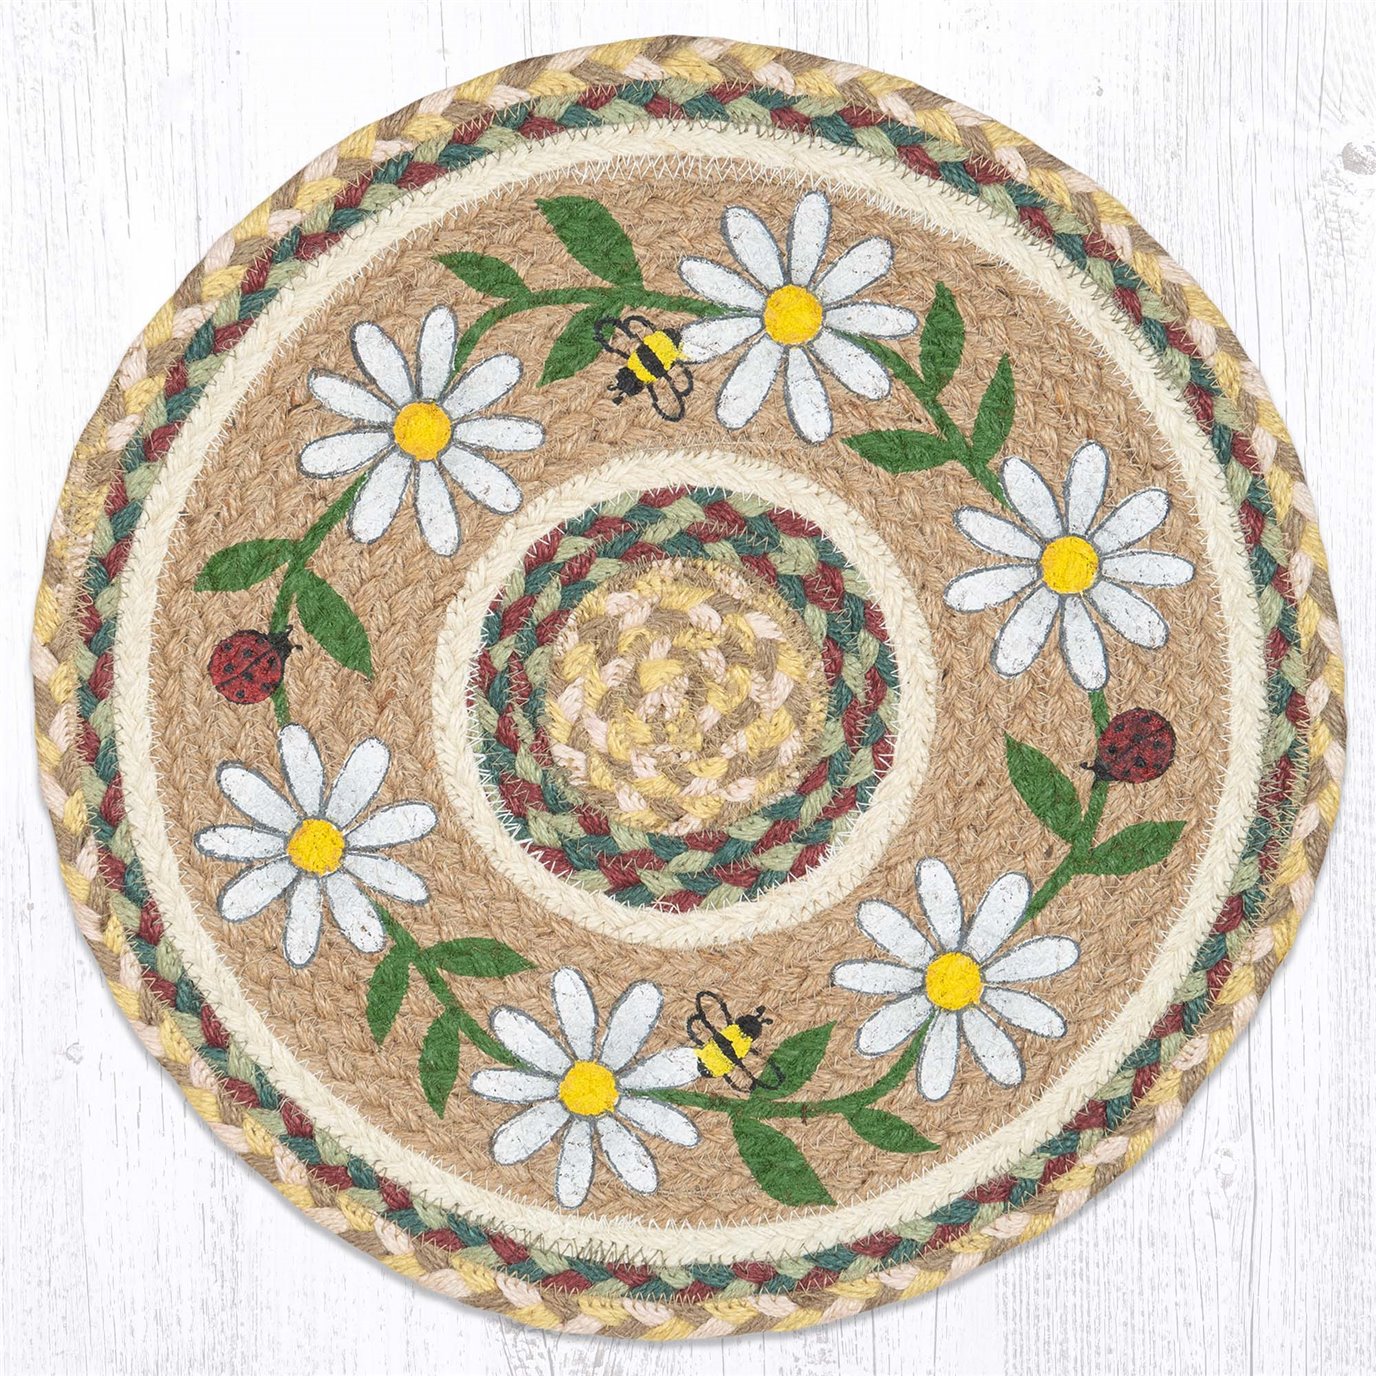 Daisy Printed Round Placemat 15"x15"